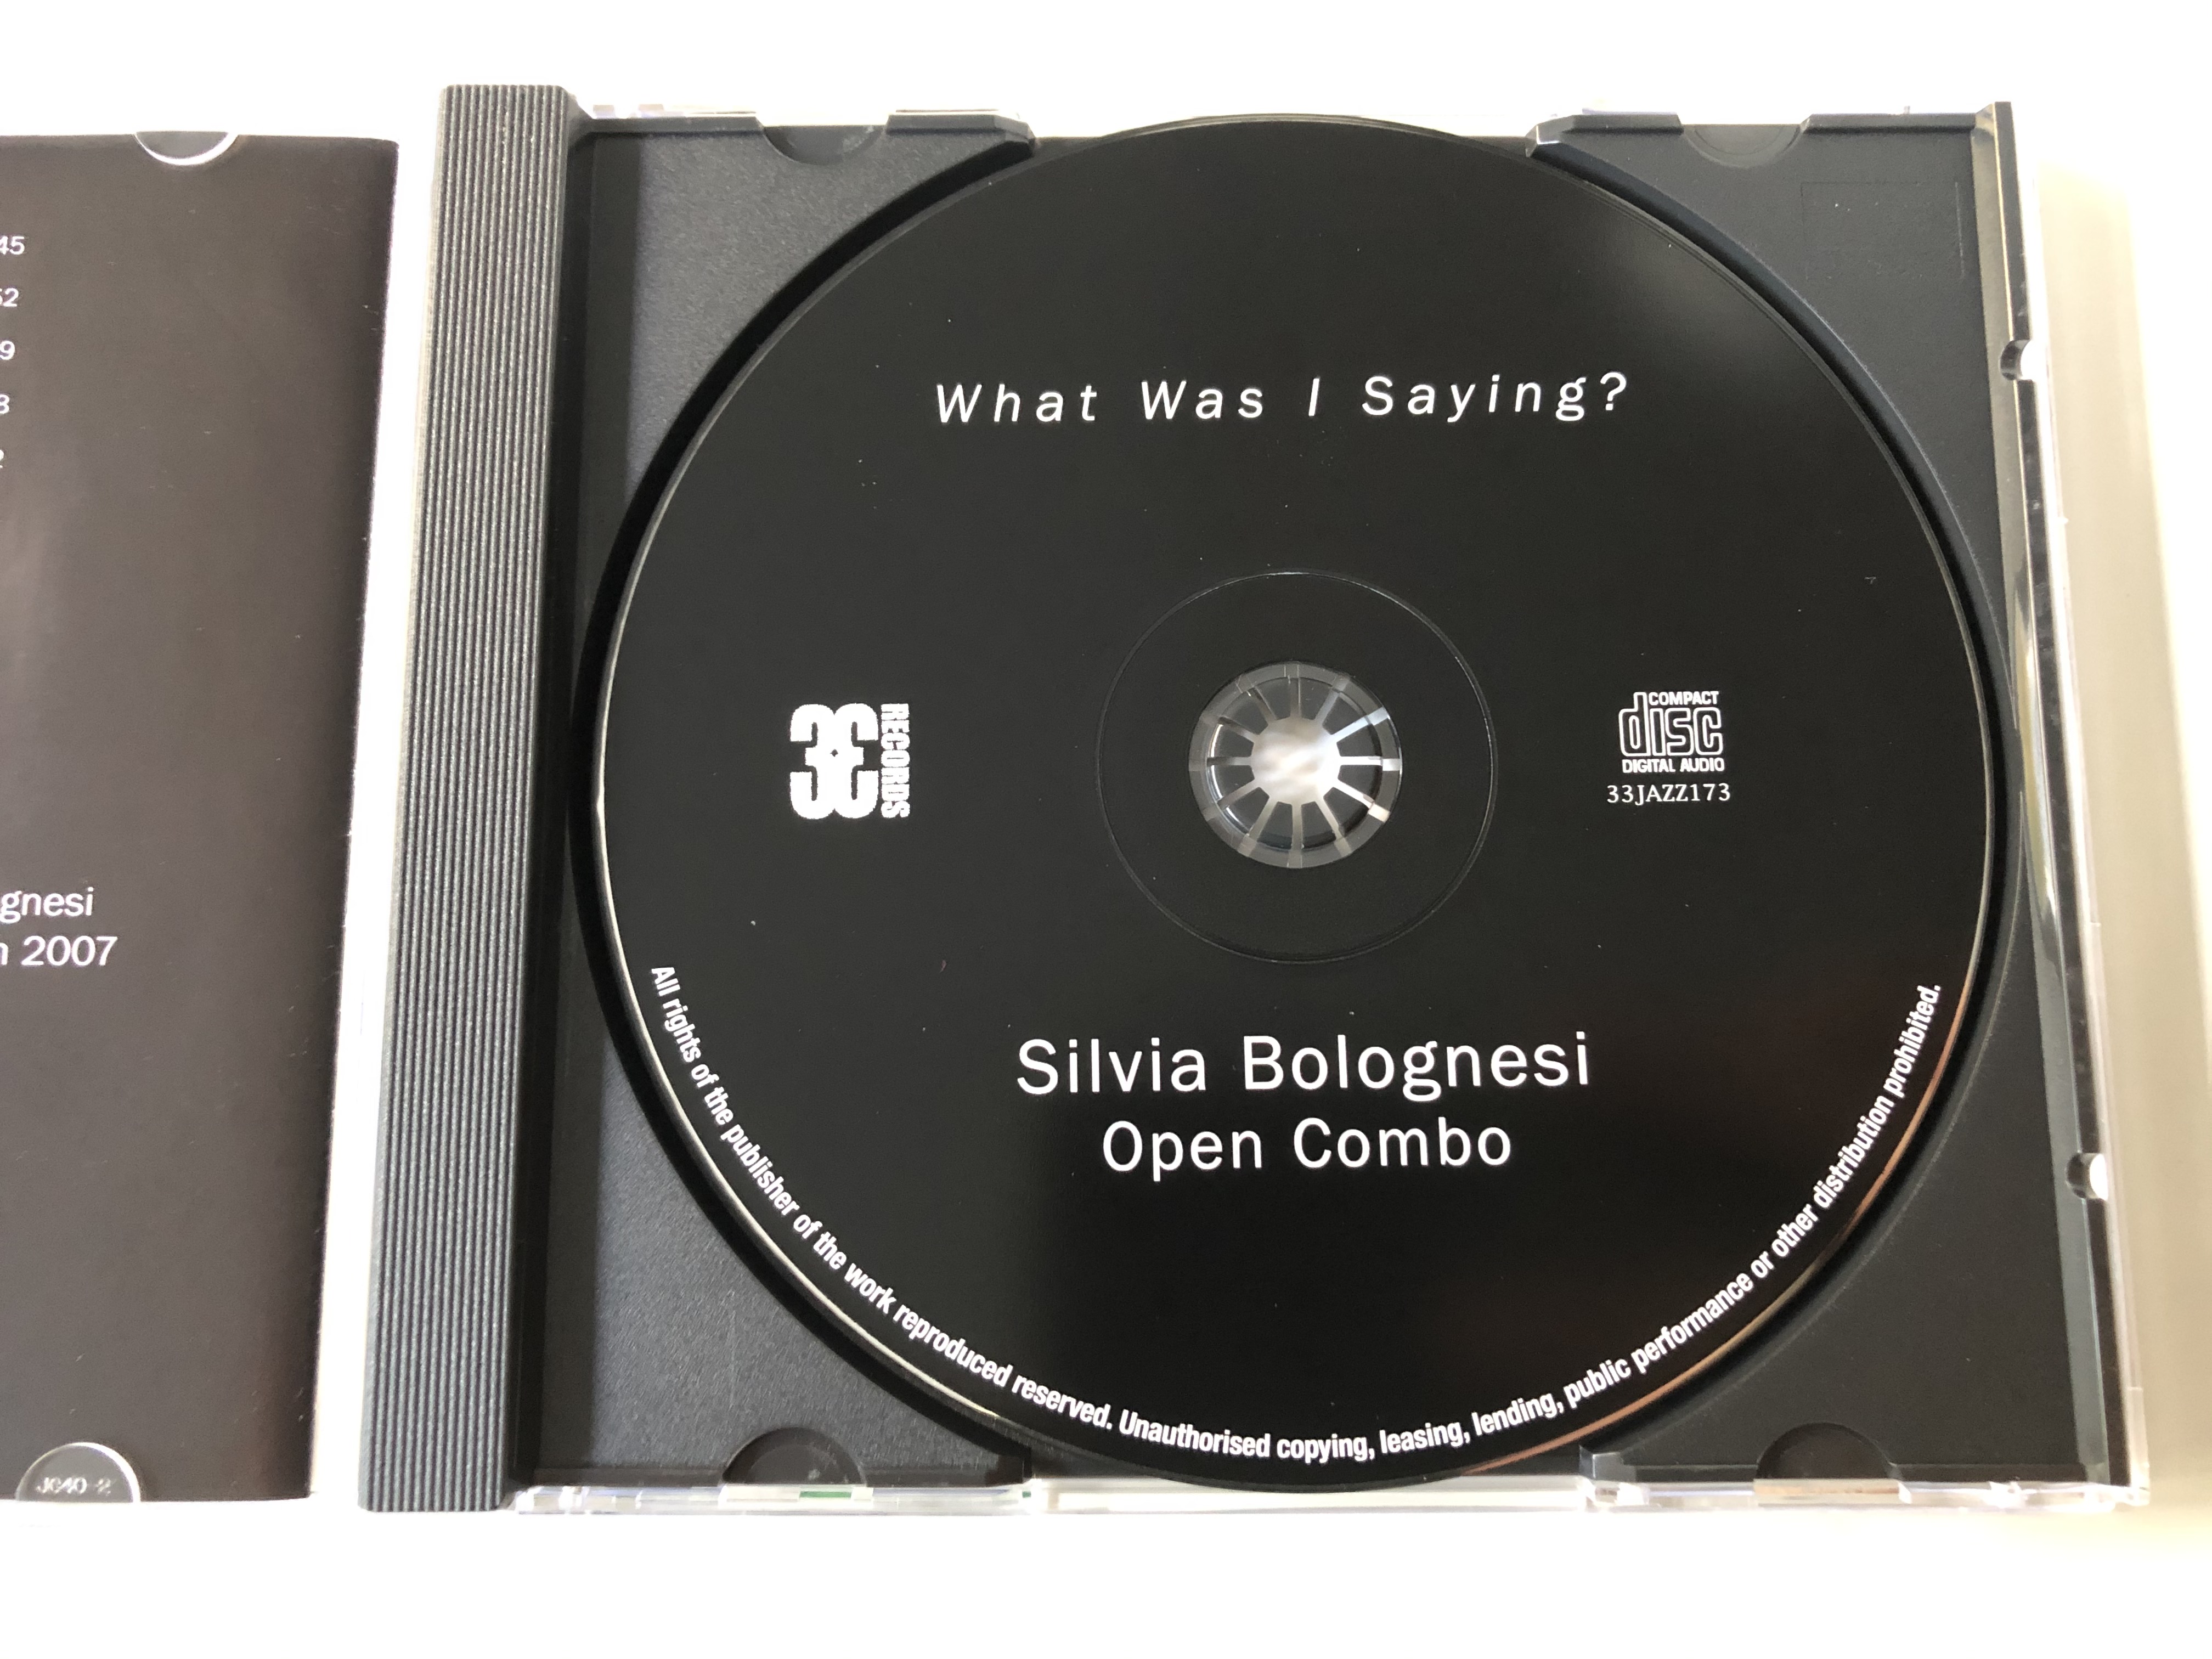 what-was-i-saying-silvia-bolognesi-open-combo-33-records-audio-cd-2008-33jazz173-4-.jpg